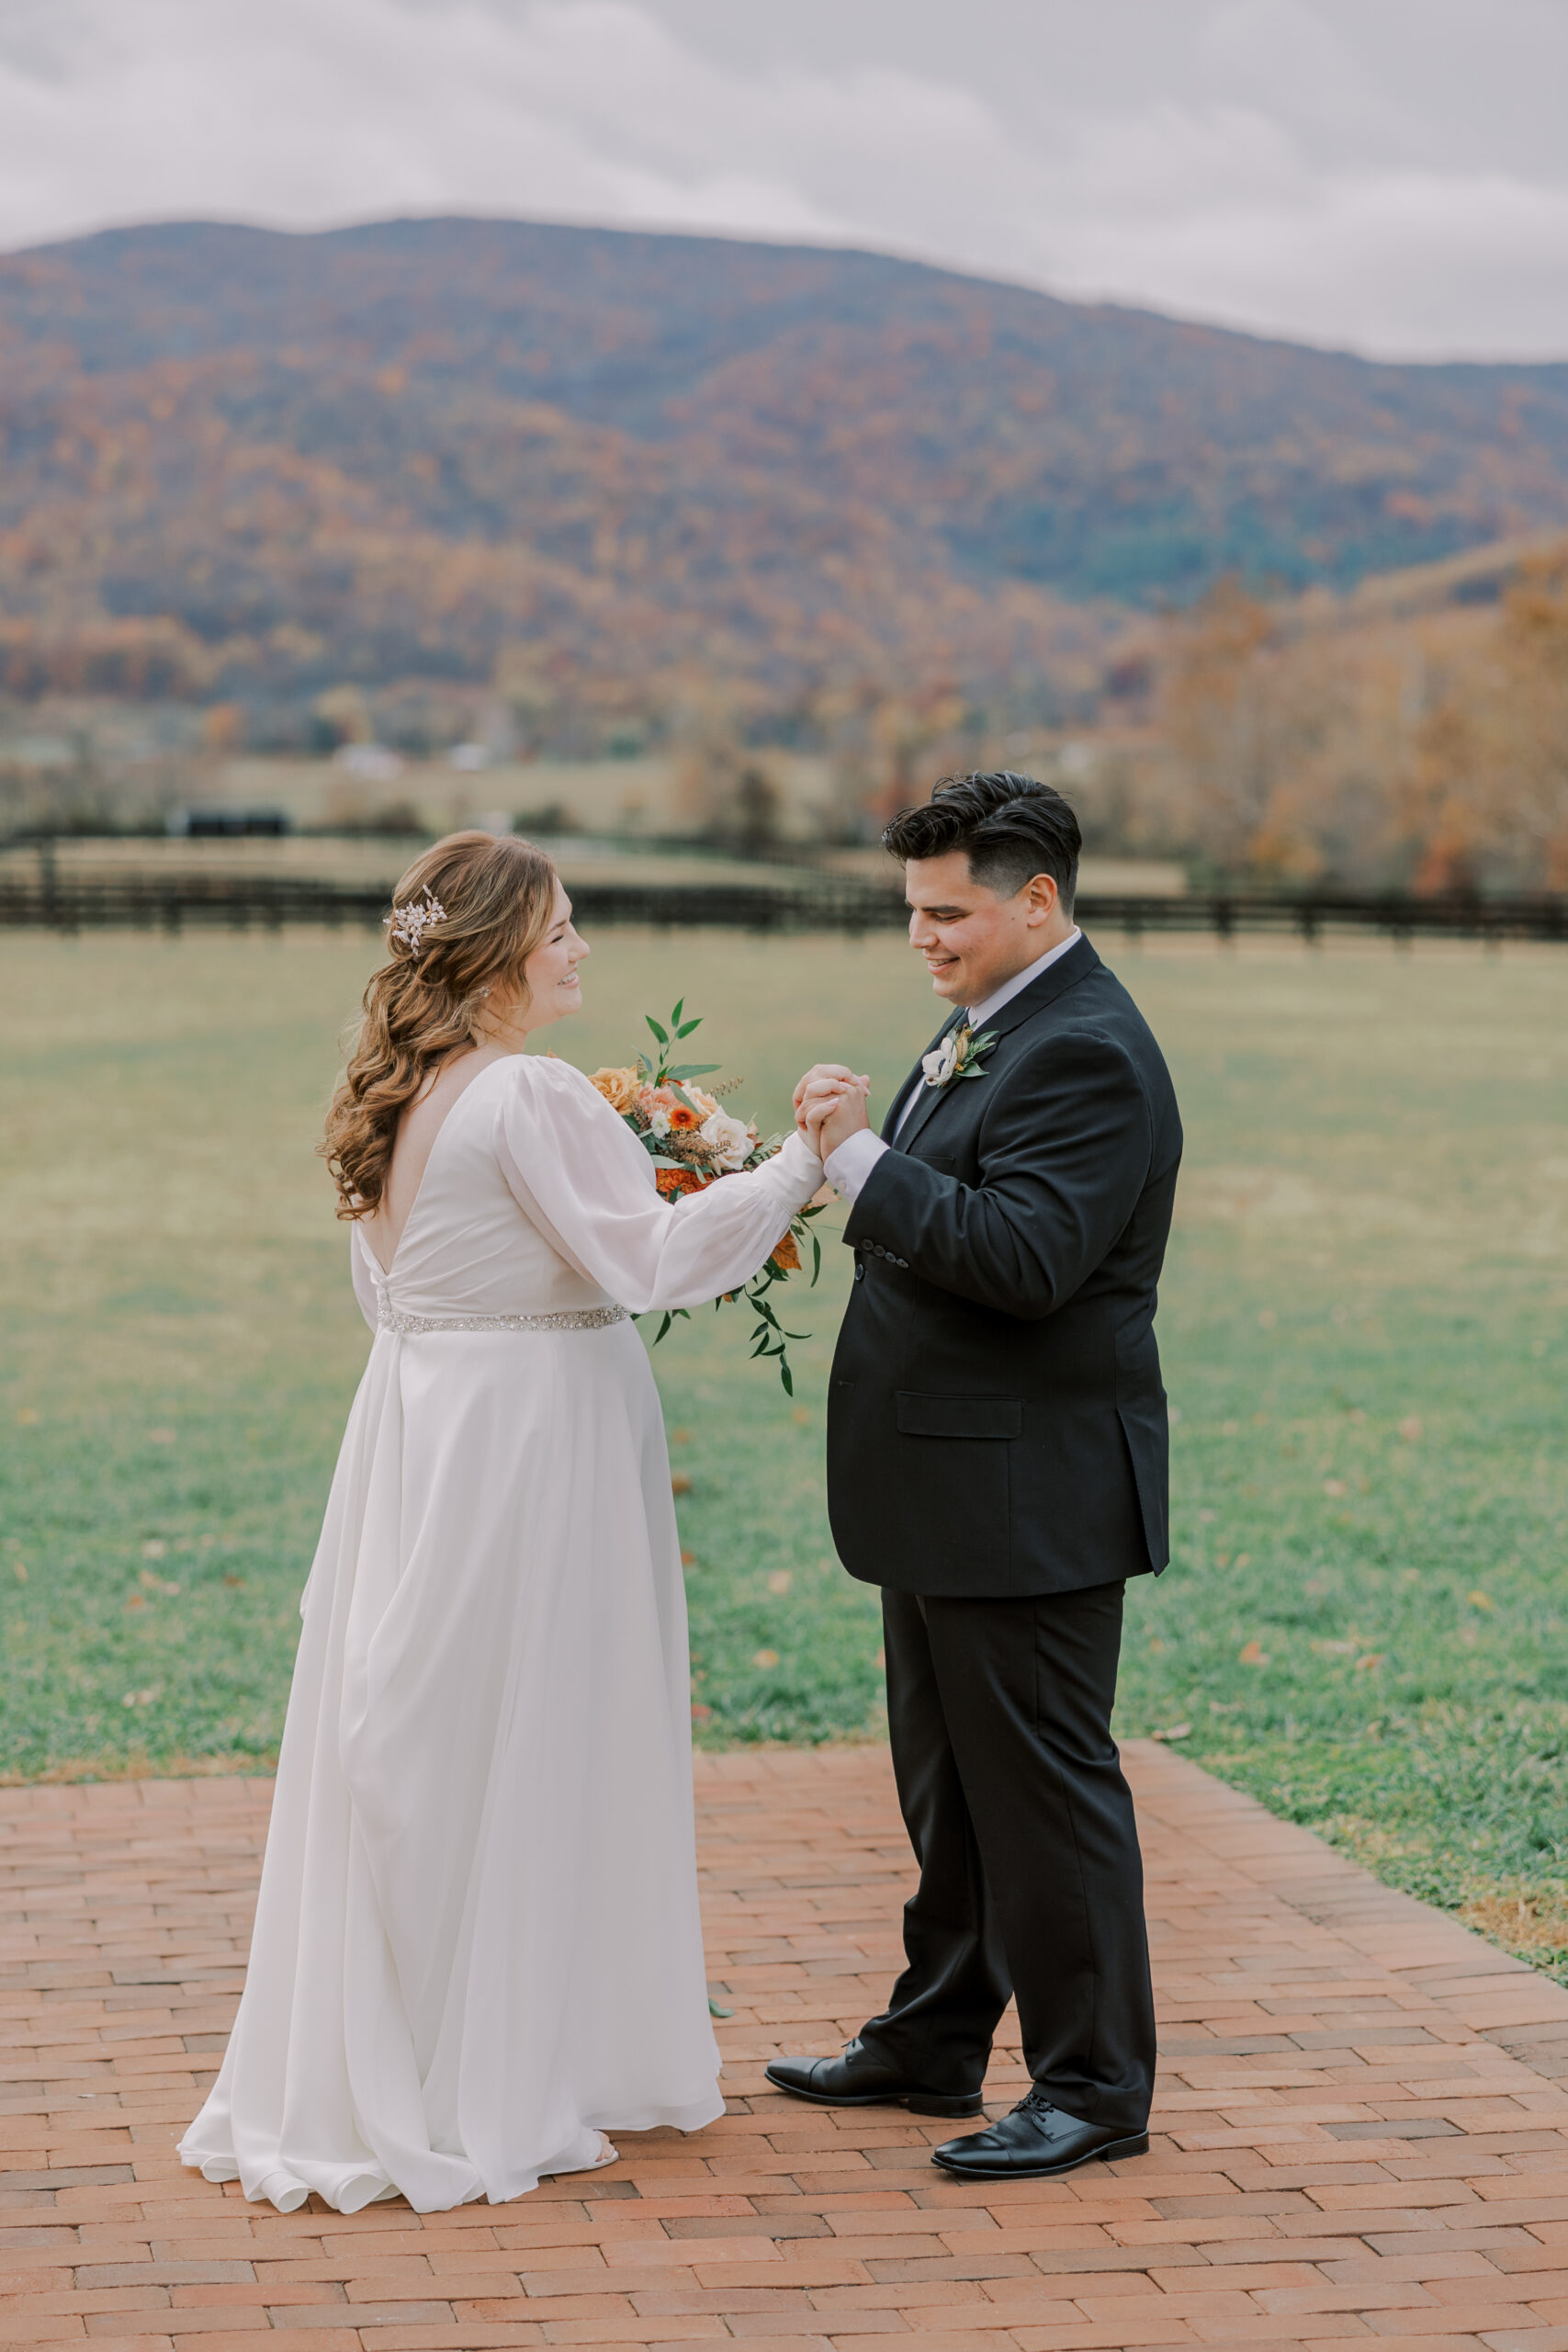 The bride and groom have an emotional first look during their wedding at King Family Vineyards, with the mountains as the perfect wedding backdrop.